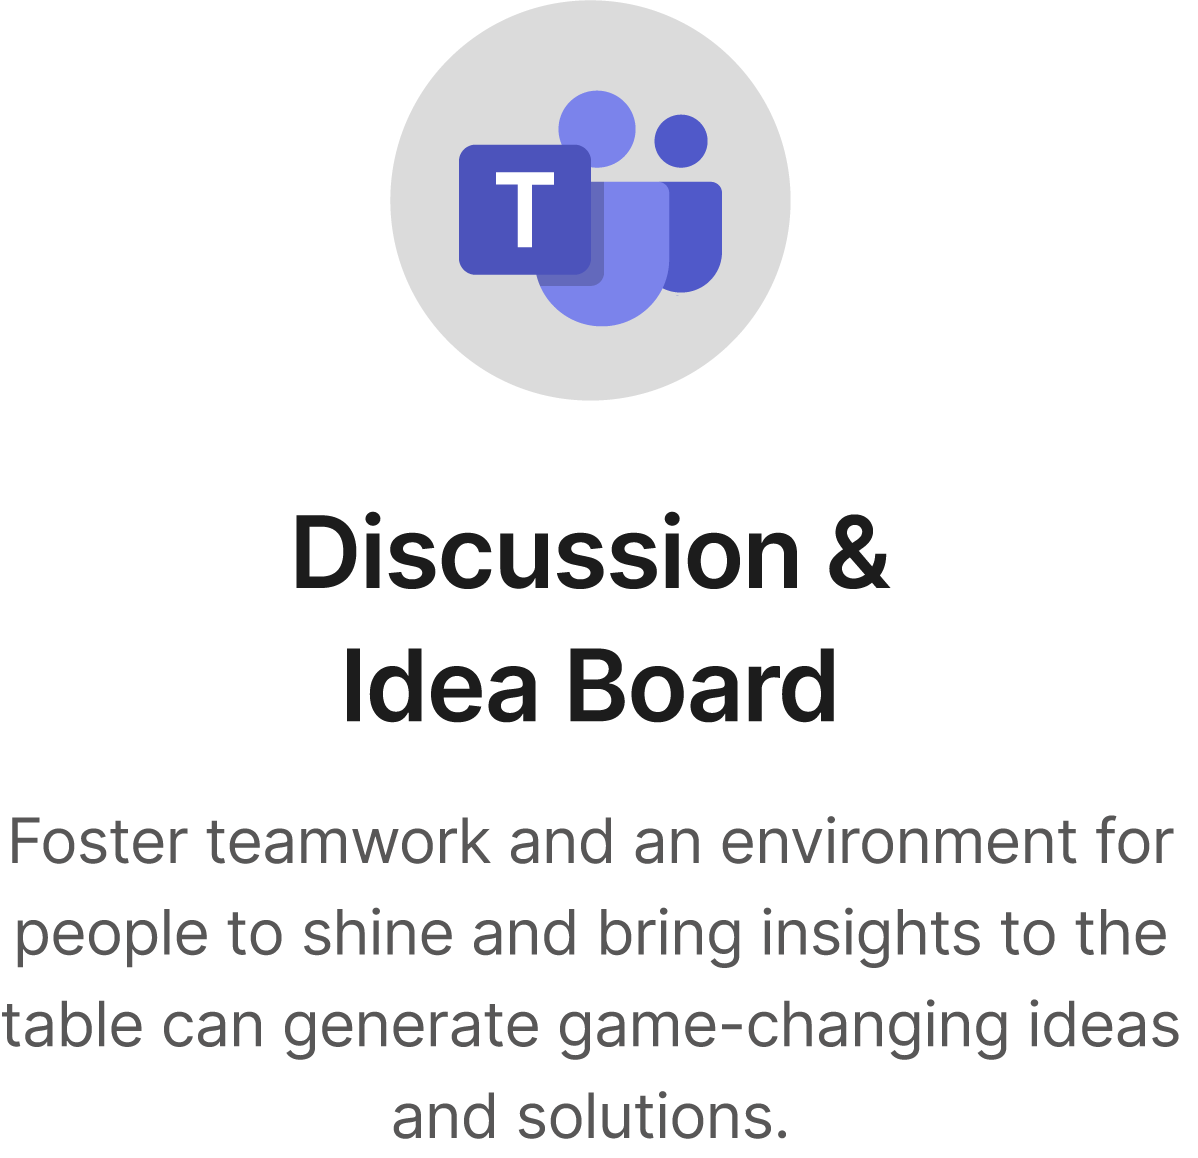 Discussion+IdeaBoard